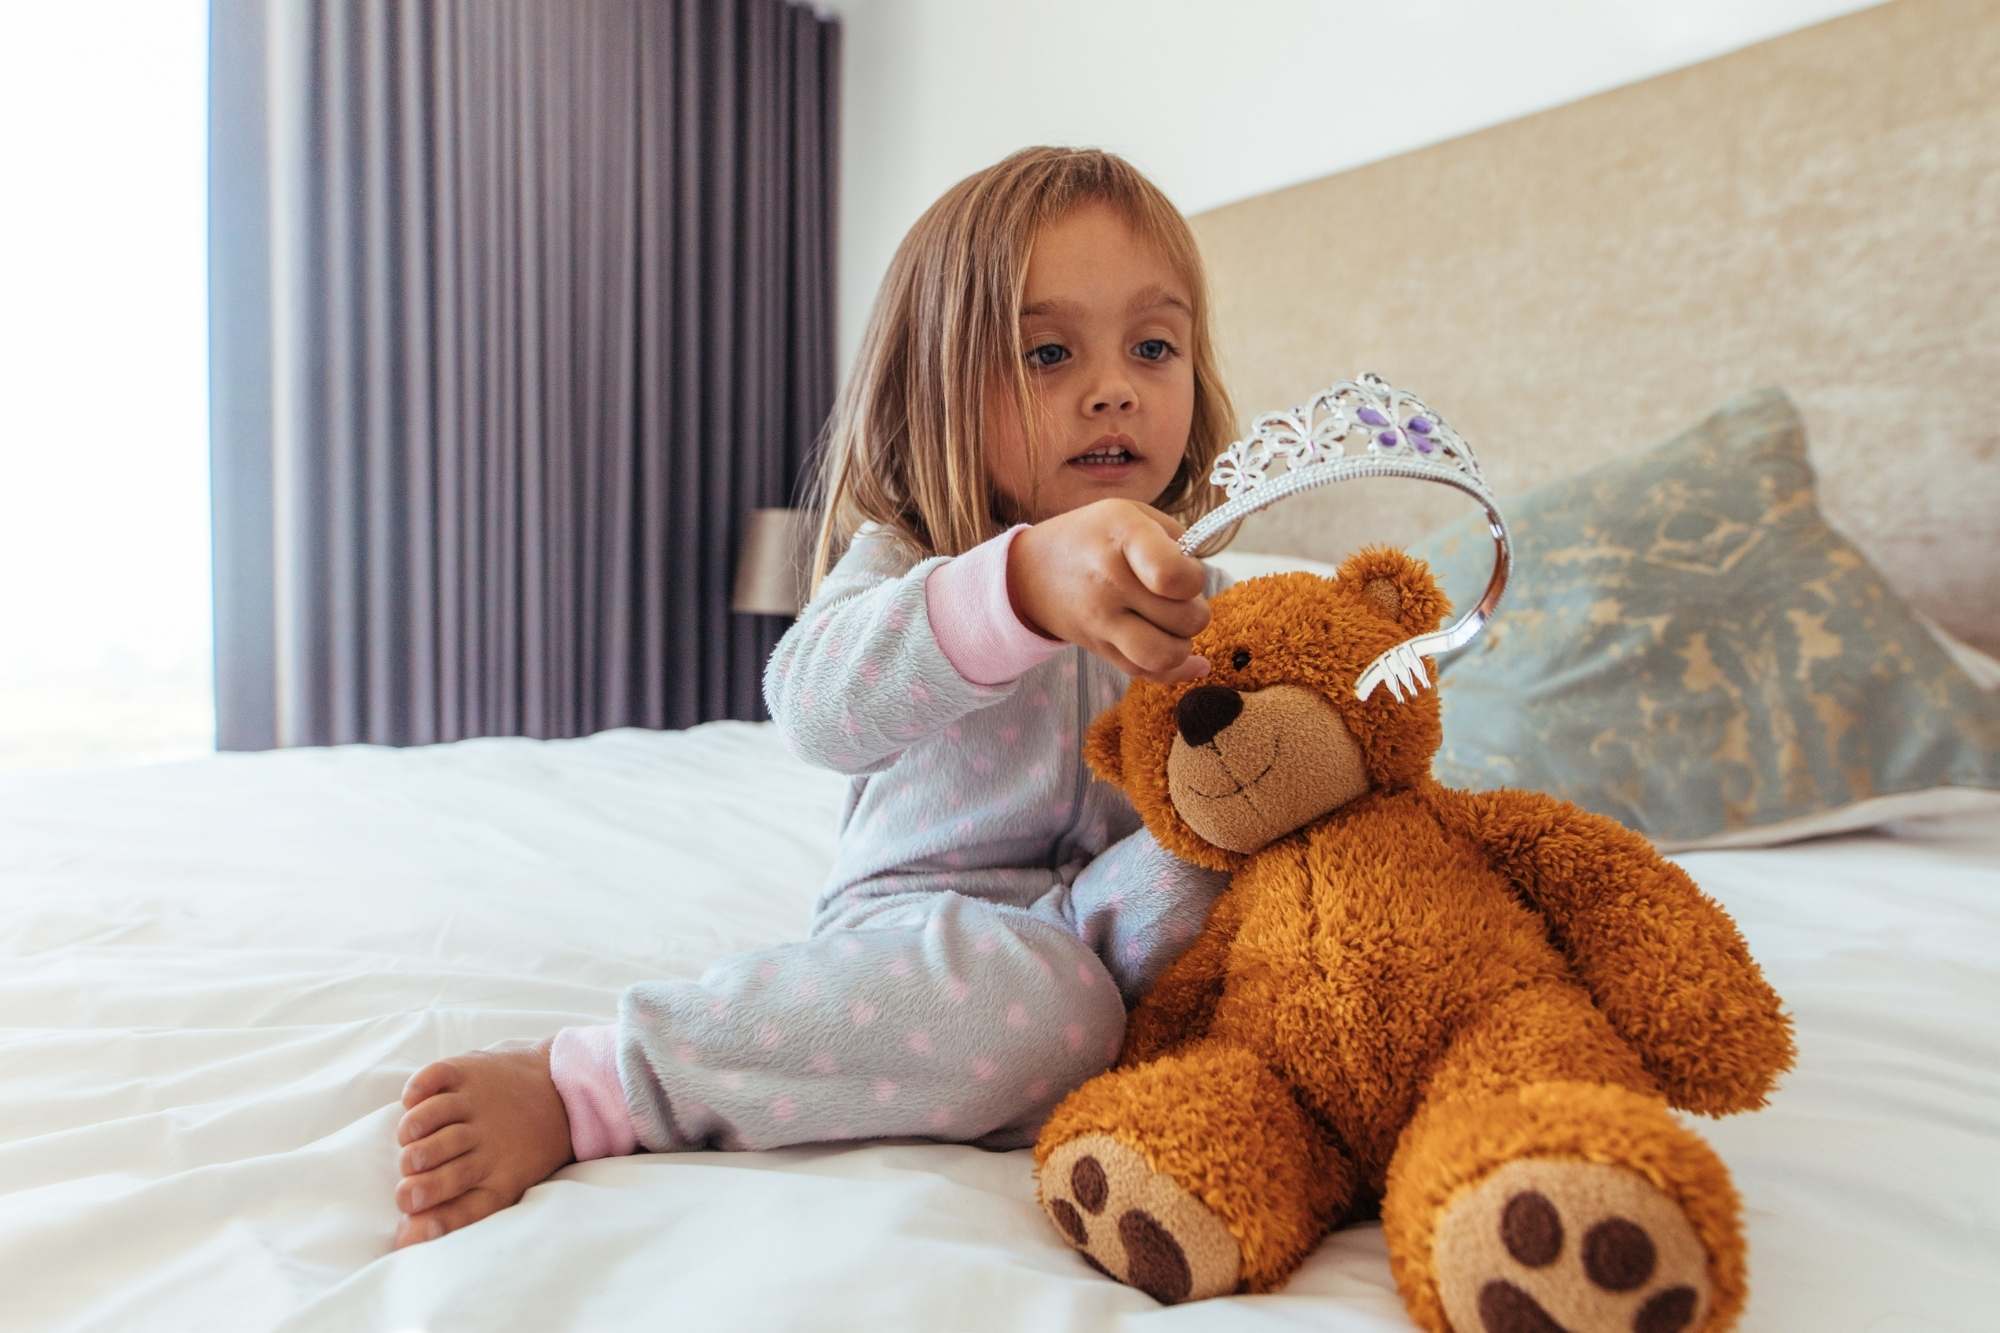 Little girl putting a crown on her teddy